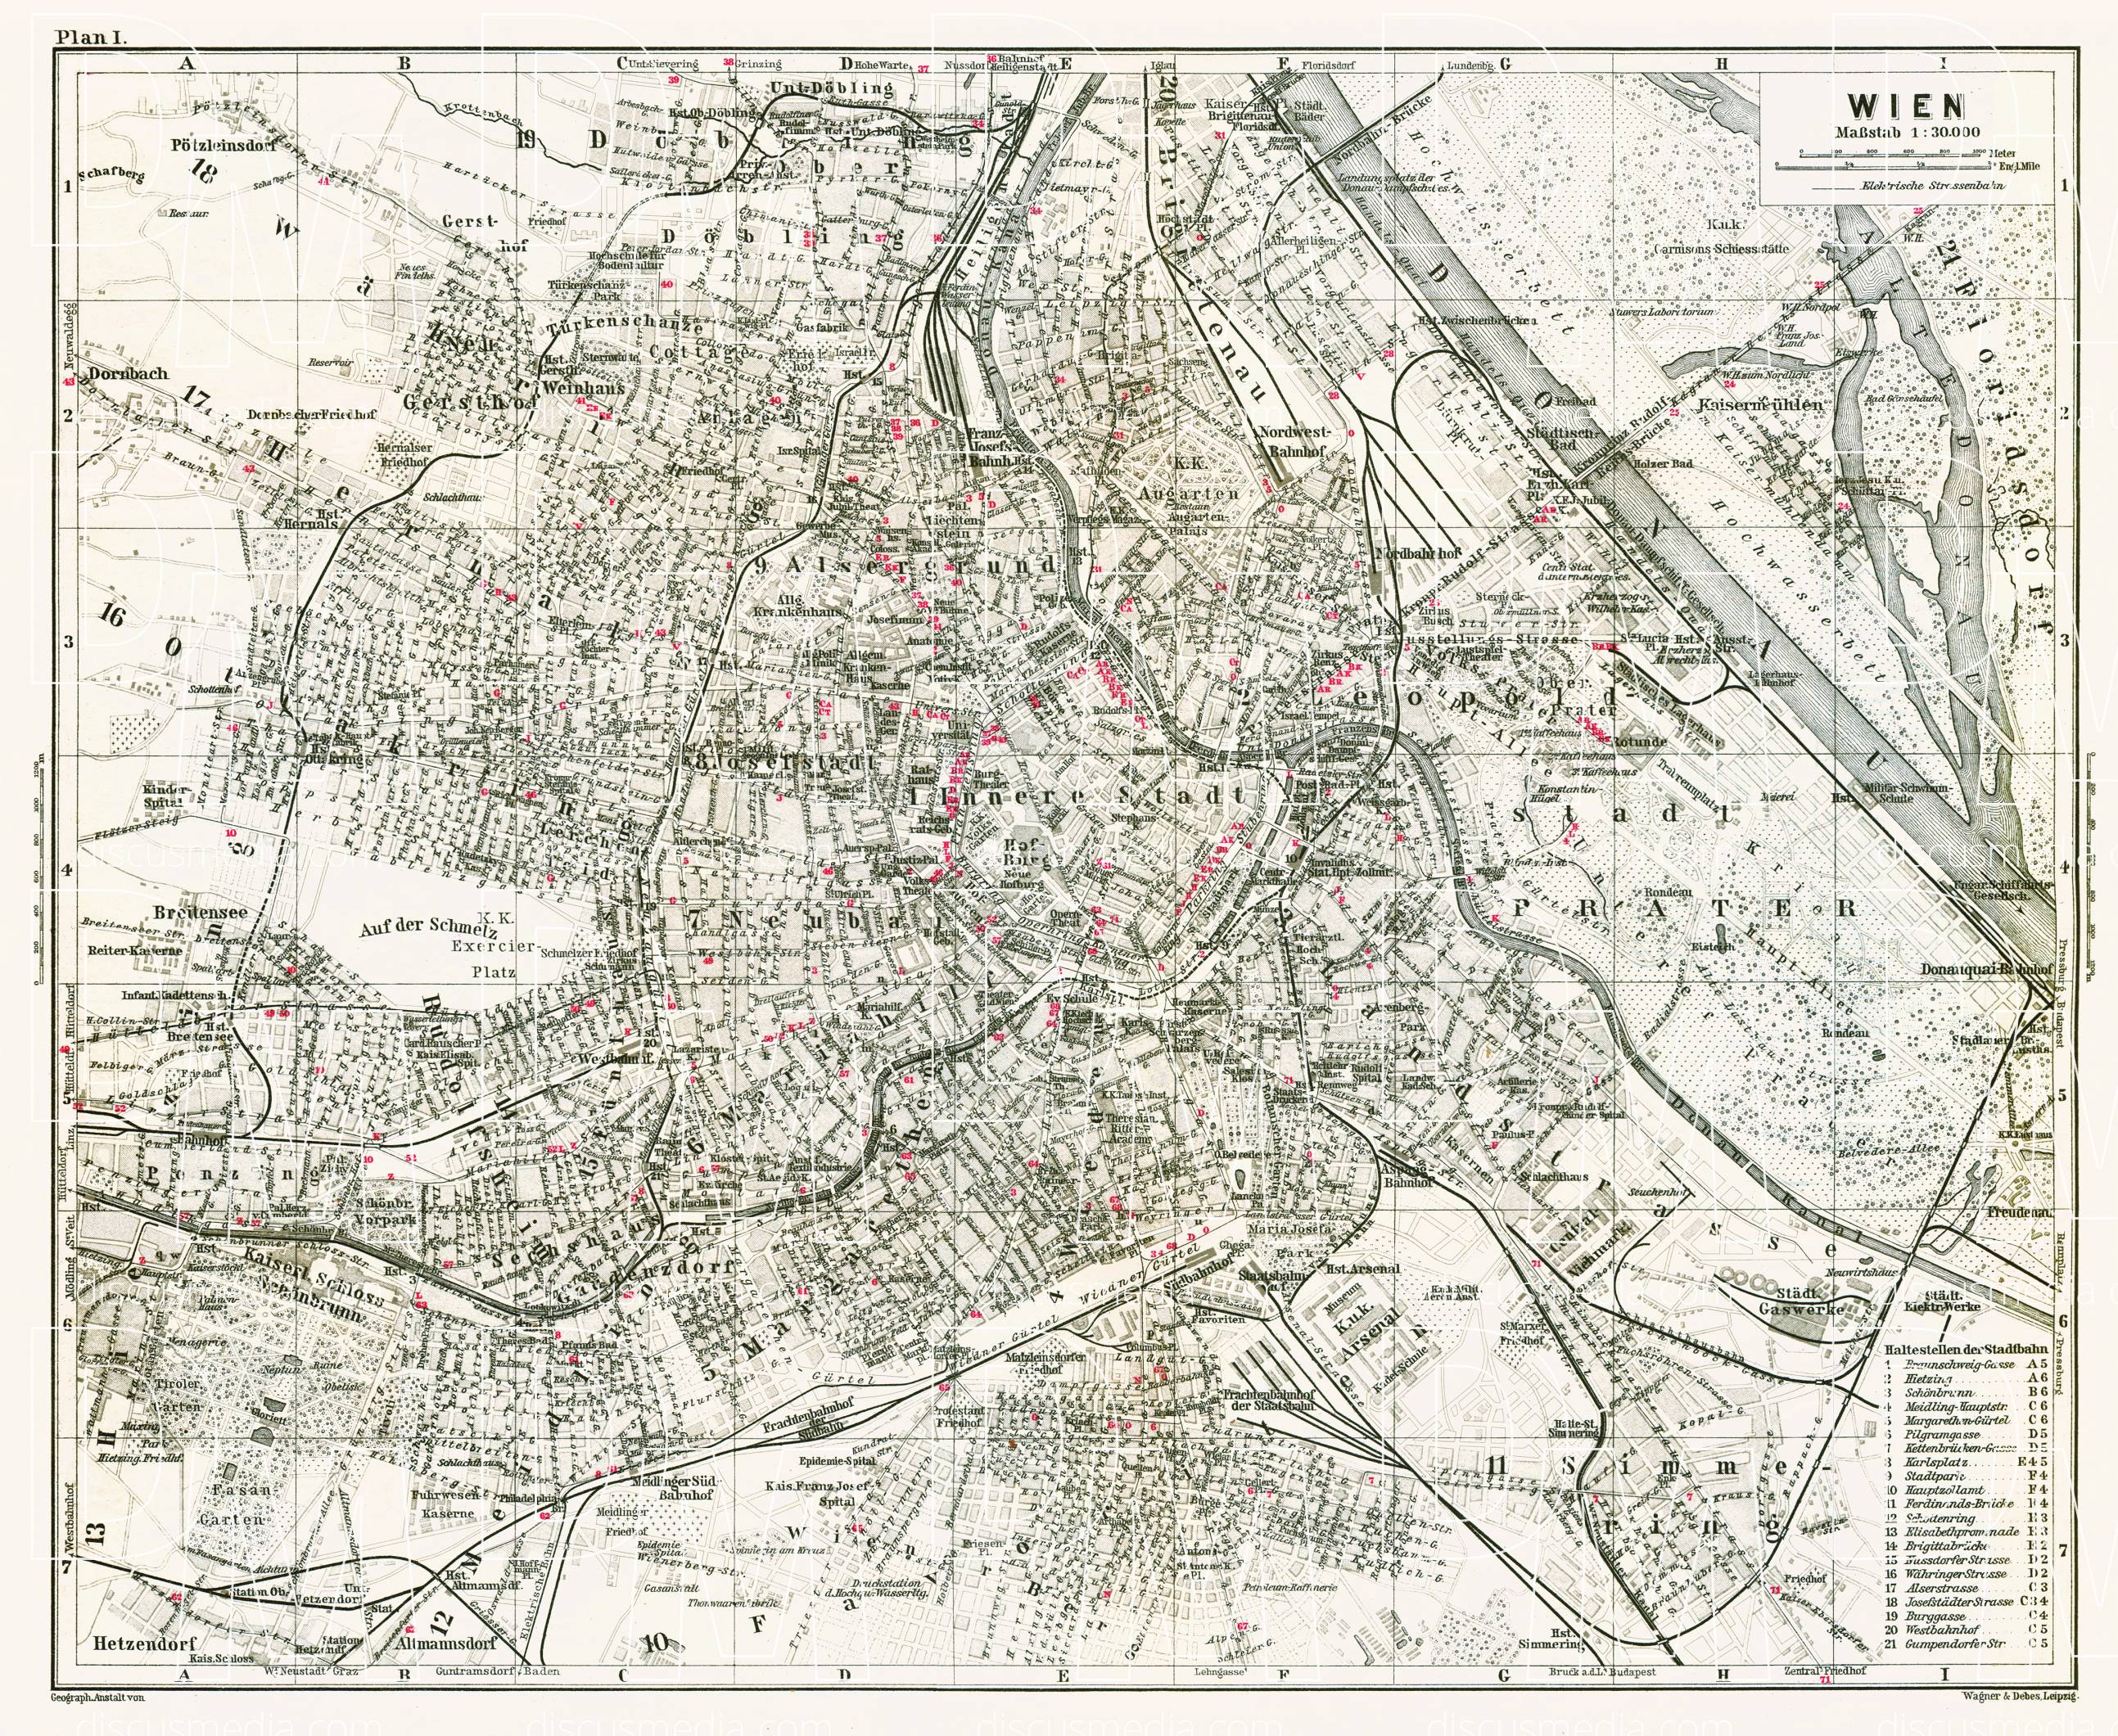 Old map of Vienna (Wien) with tram routes in 1910. Buy vintage map ...